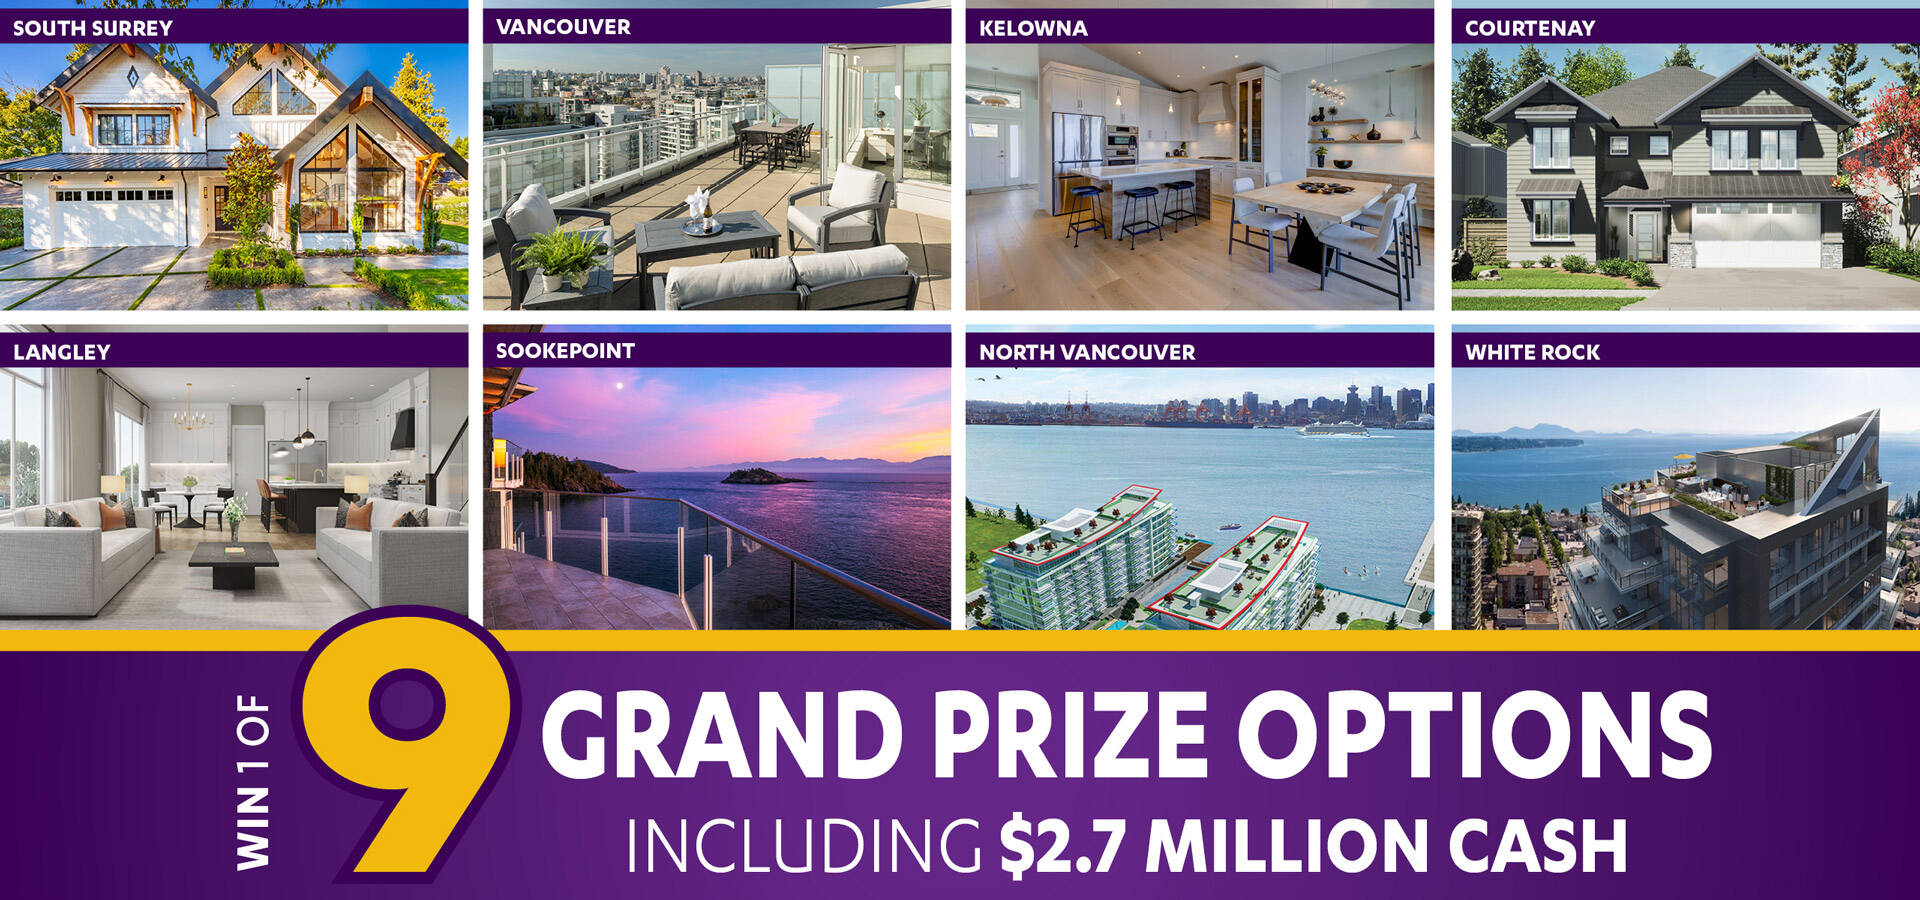 Win and choose one of nine Grand Prize options, including home packages in Greater Vancouver, the Okanagan, and Vancouver Island, or $2,700,000 cash.